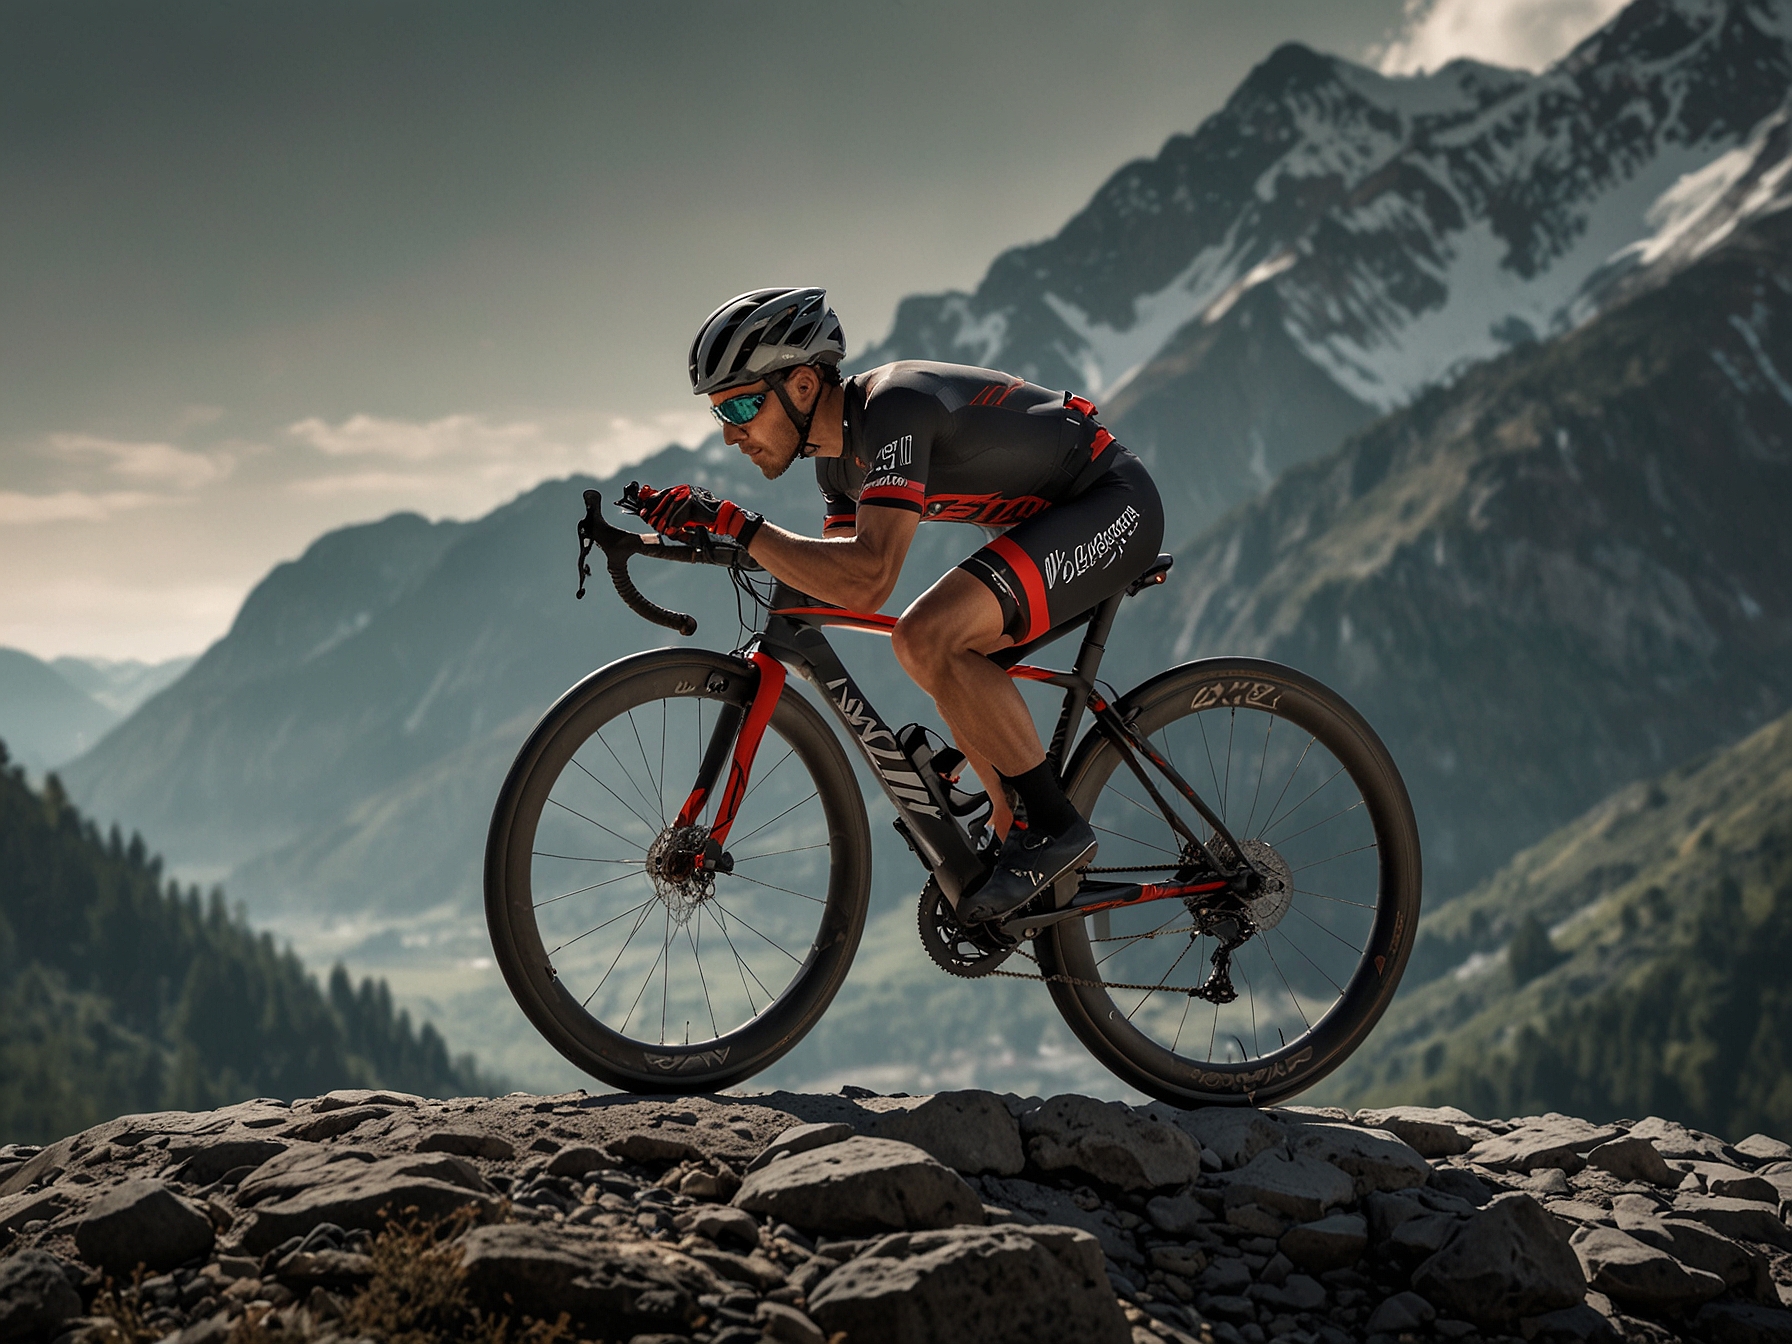 The Wilier Verticale SLR showcased against a mountain backdrop, highlighting its sleek carbon fiber design and minimalist aesthetic, perfect for climbing enthusiasts.